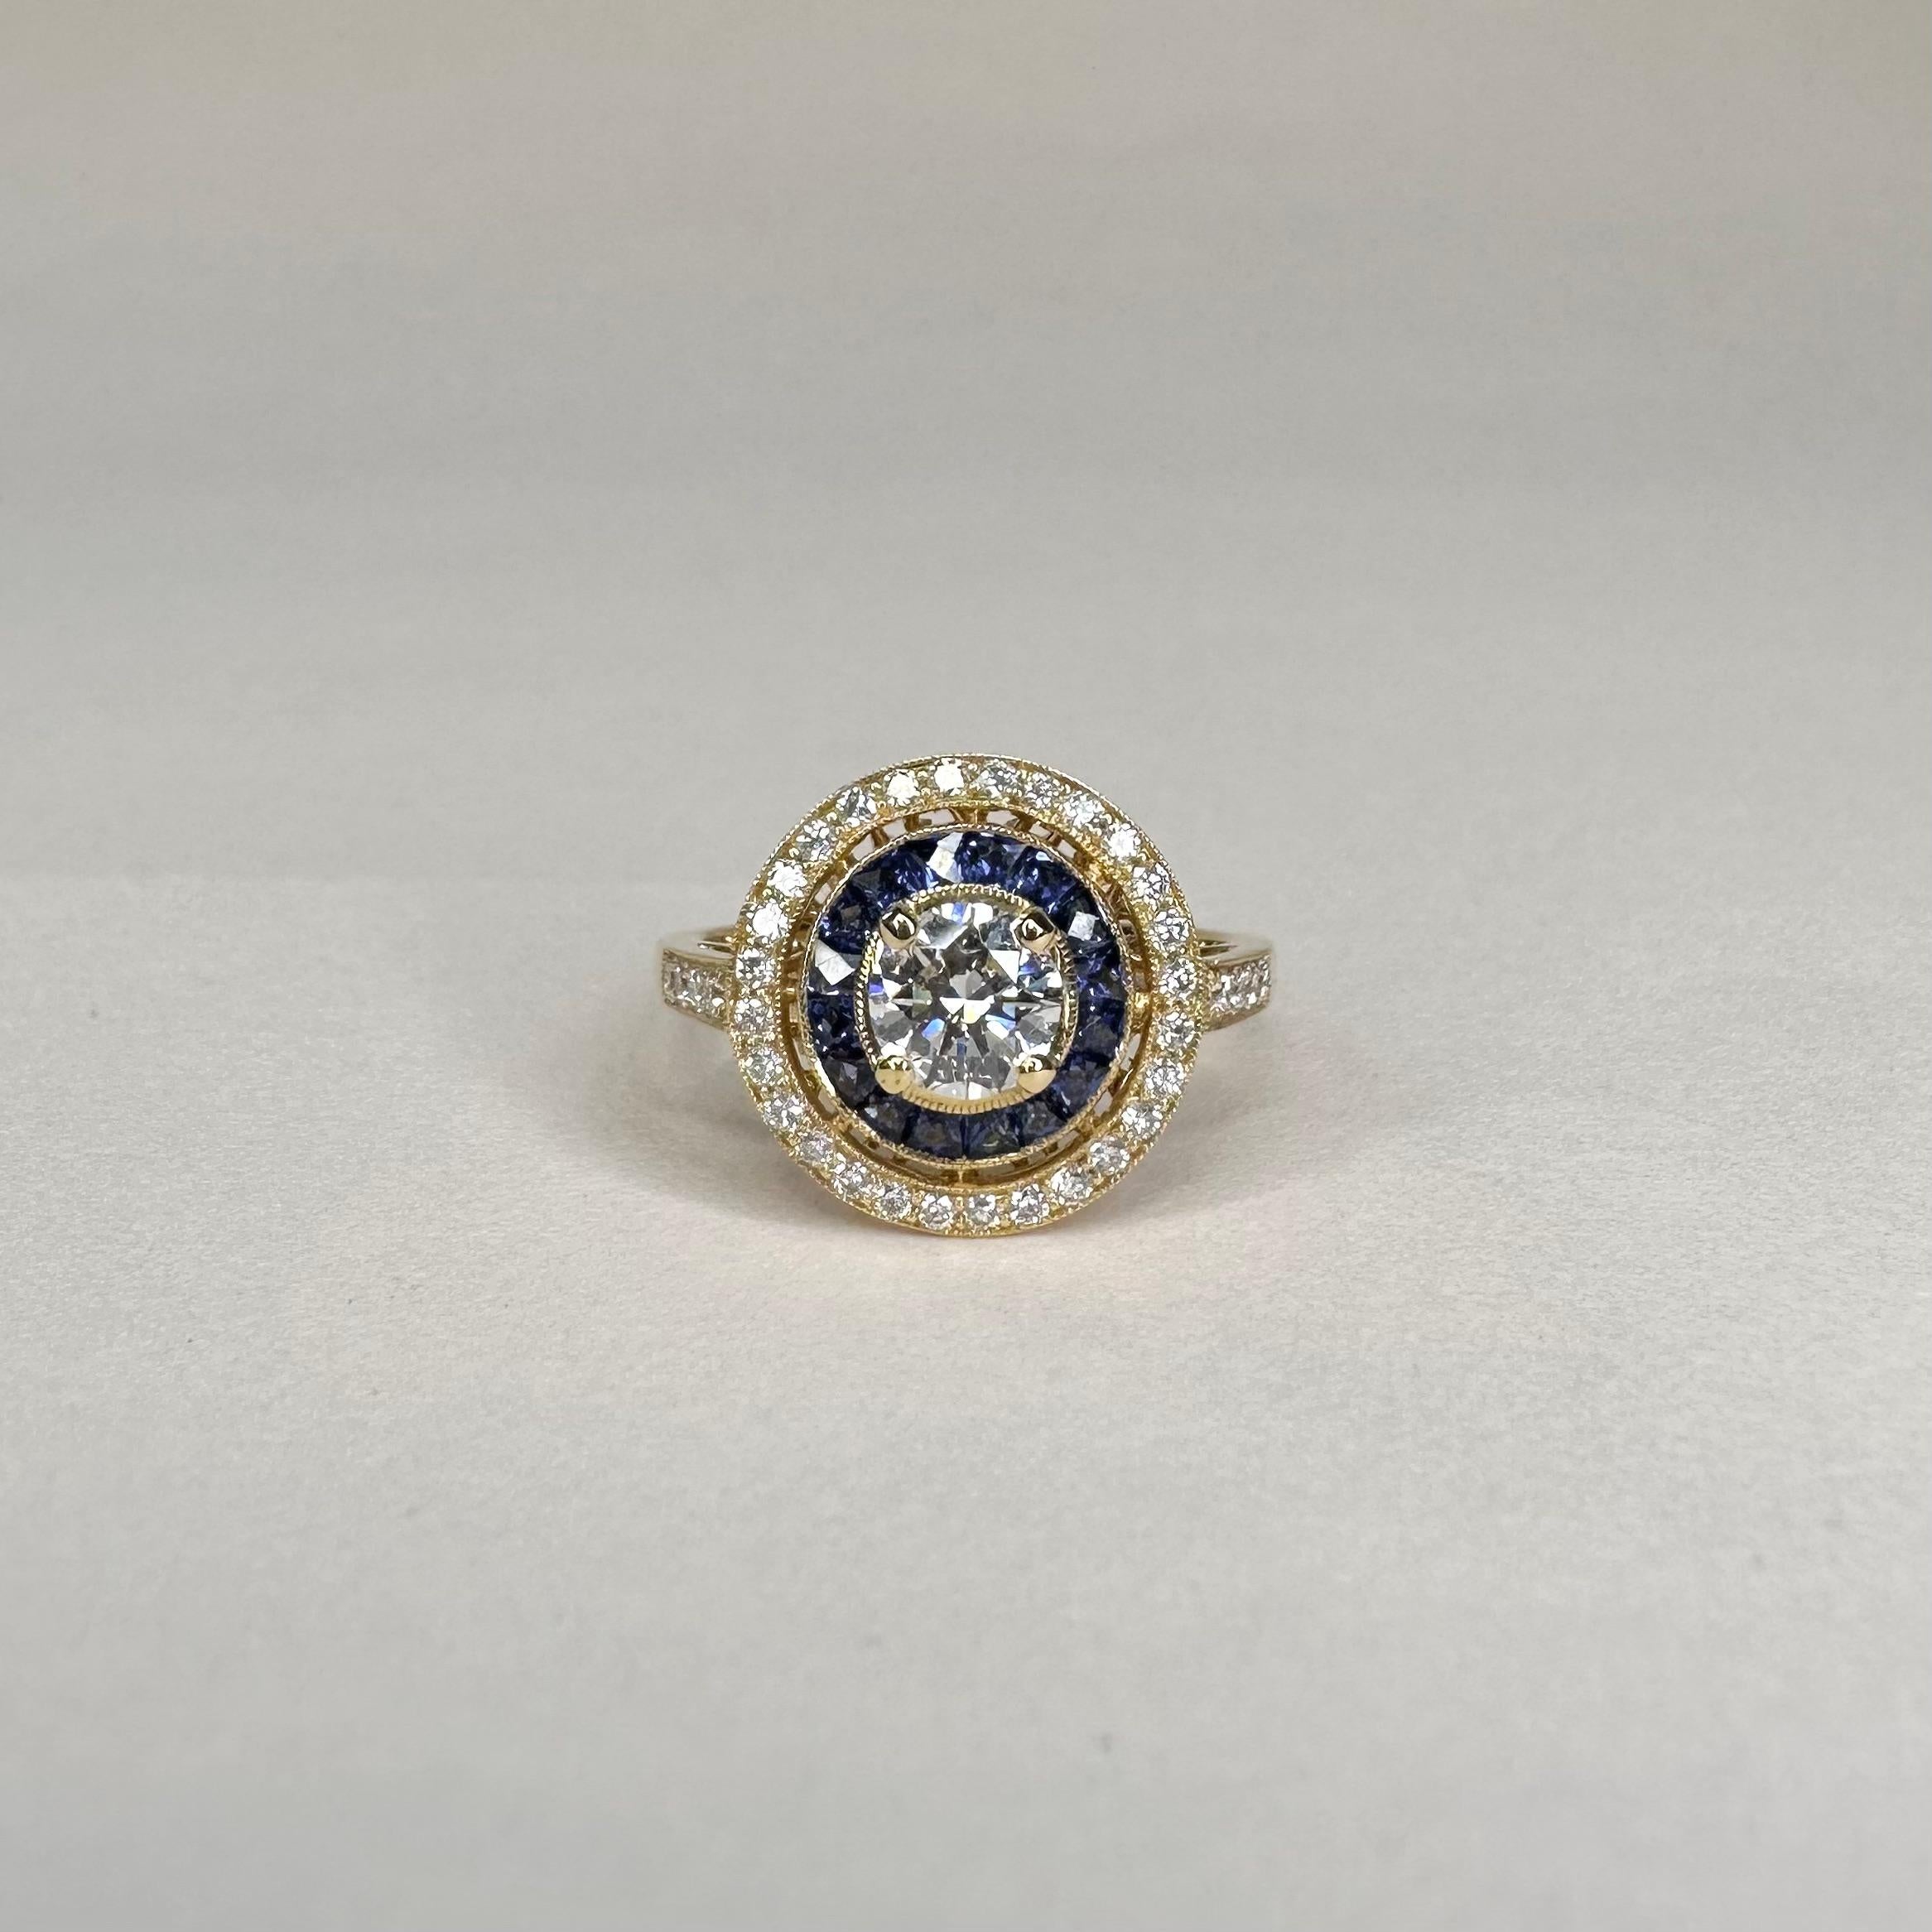 For Sale:  Art Deco Style 18k Yellow Gold Calibre Cut Sapphire Ring With 0.75 Ct Diamond 4